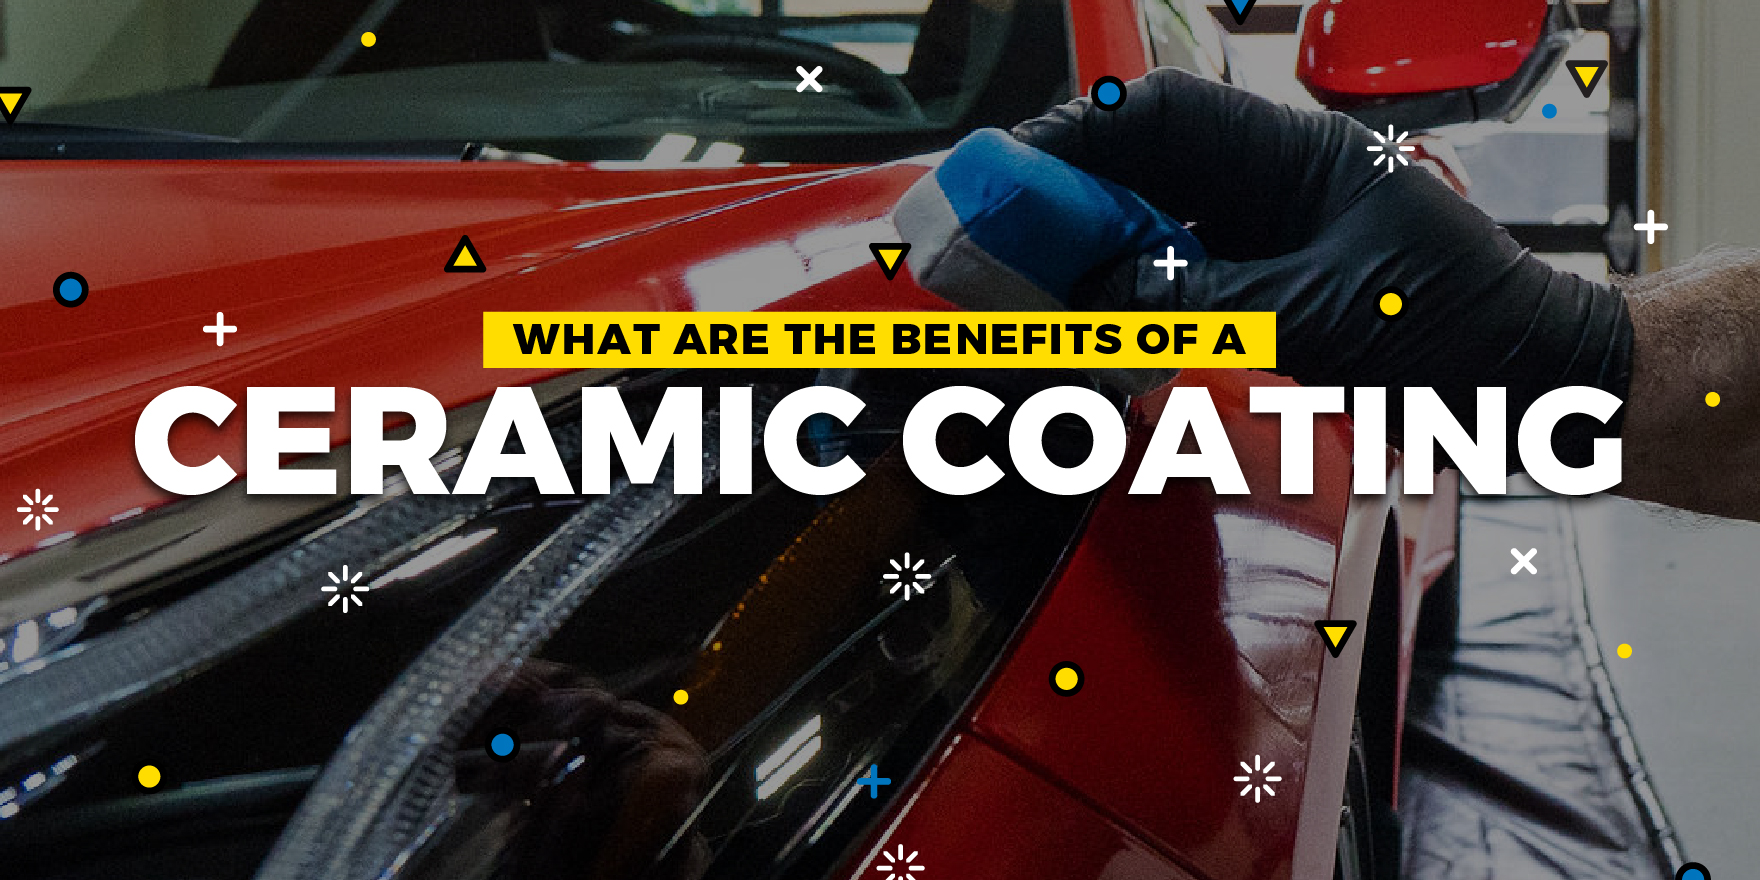 Is Ceramic Coating Good For Your Car? A Personal Look At The Upsides And  Downsides